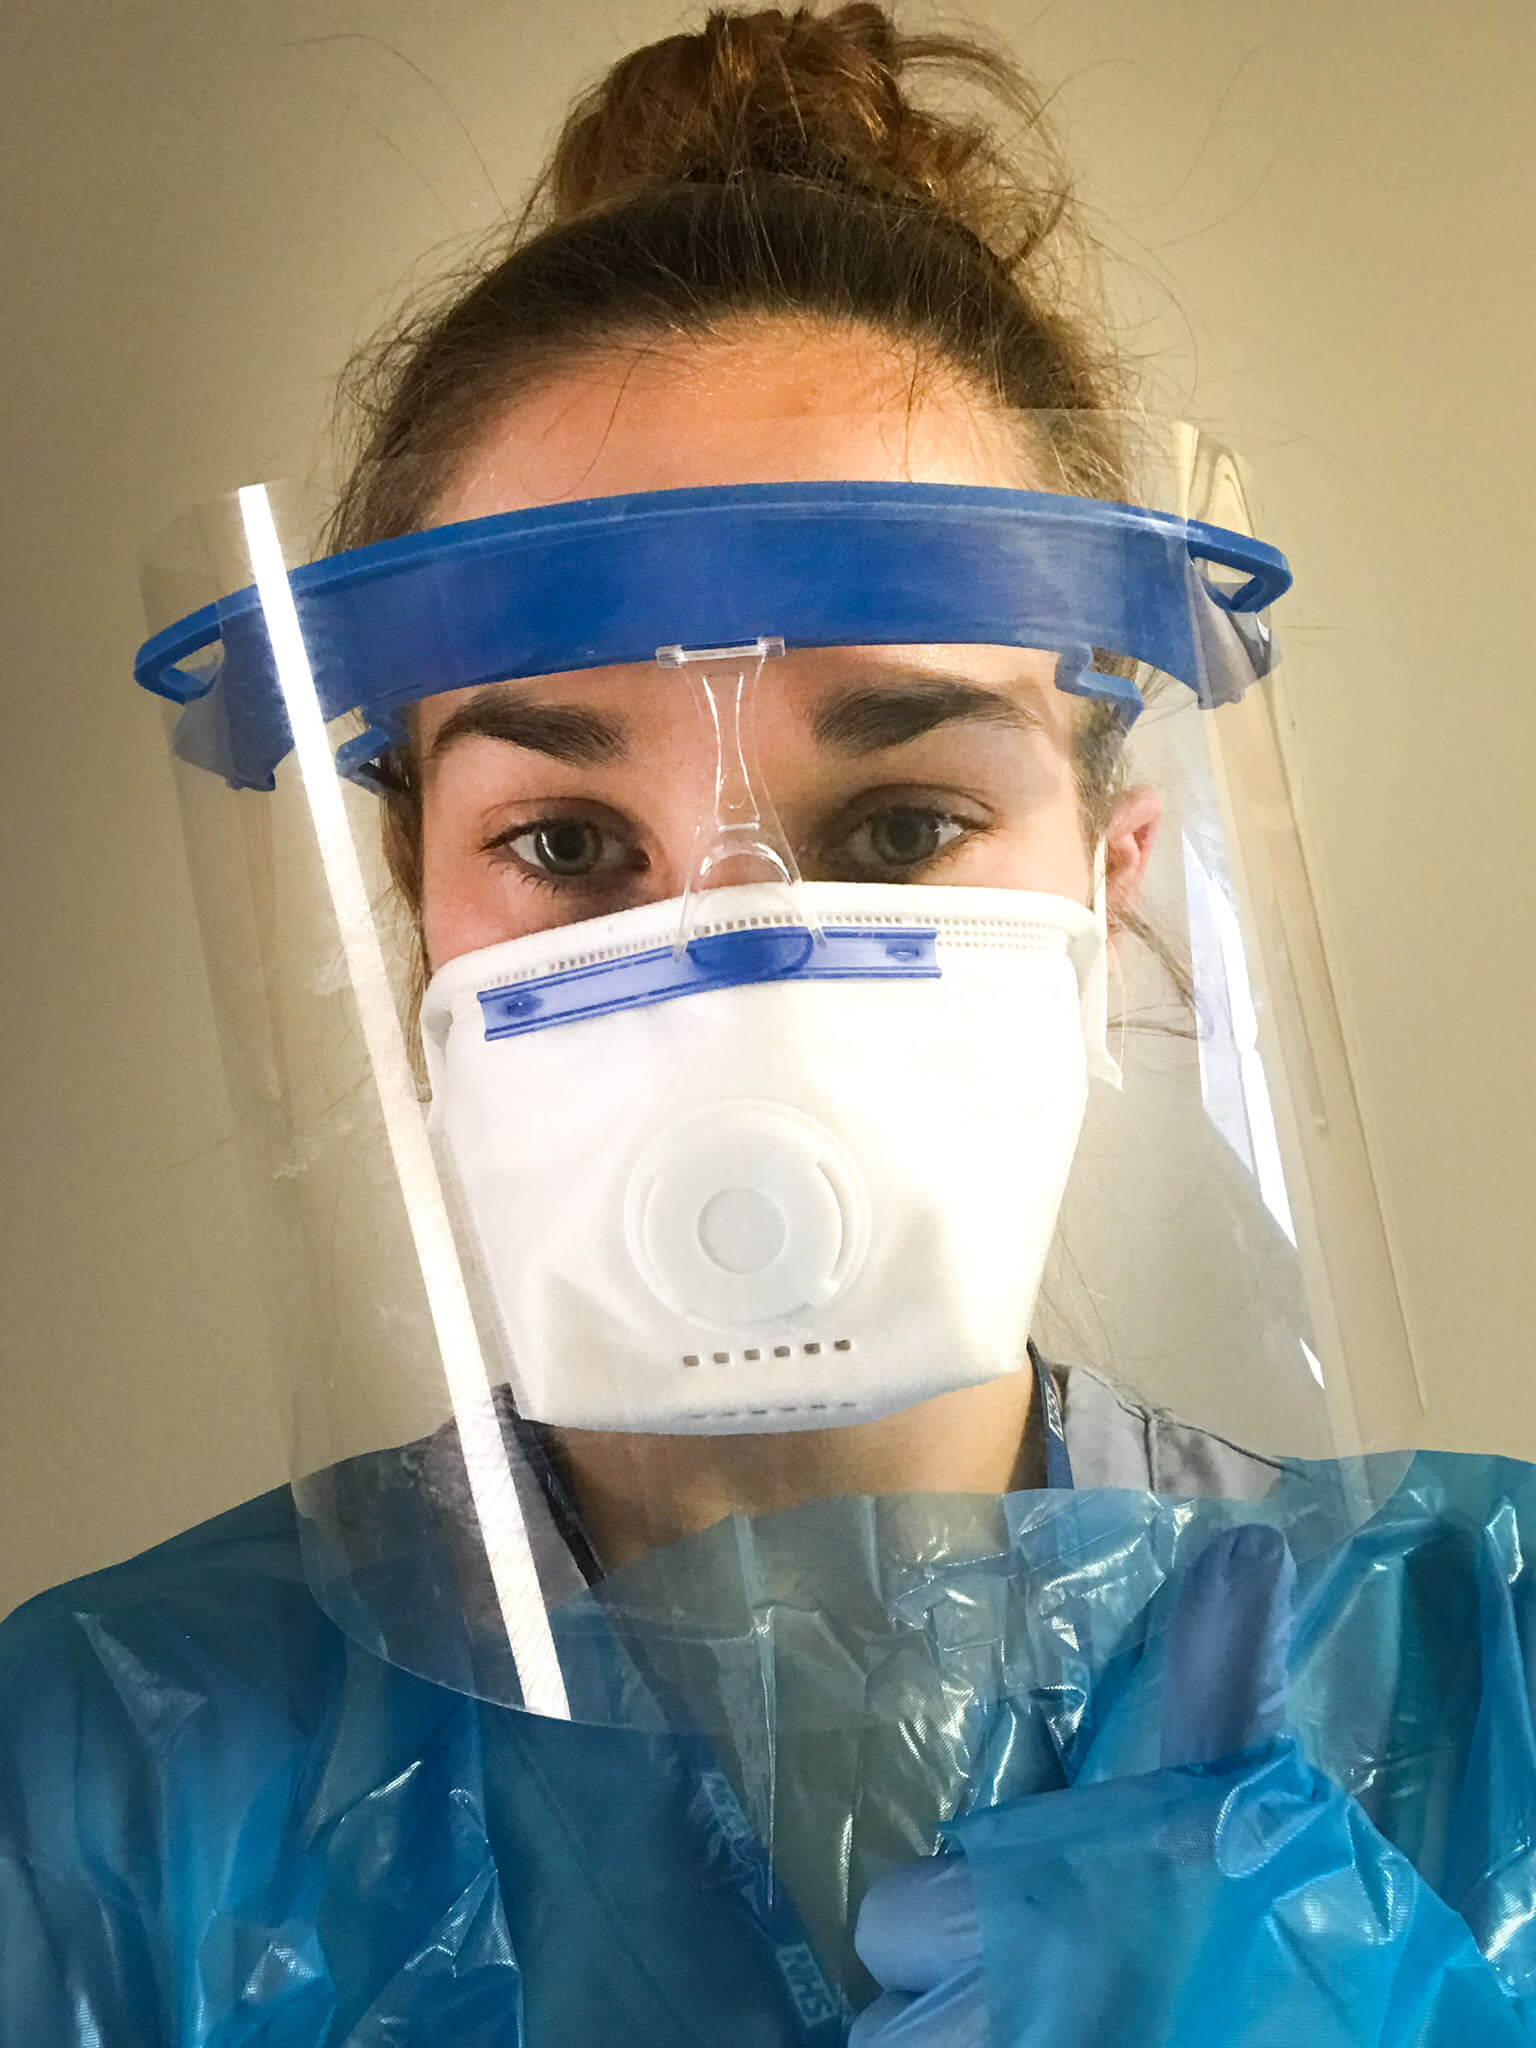 A young woman wearing personal protective clothing.